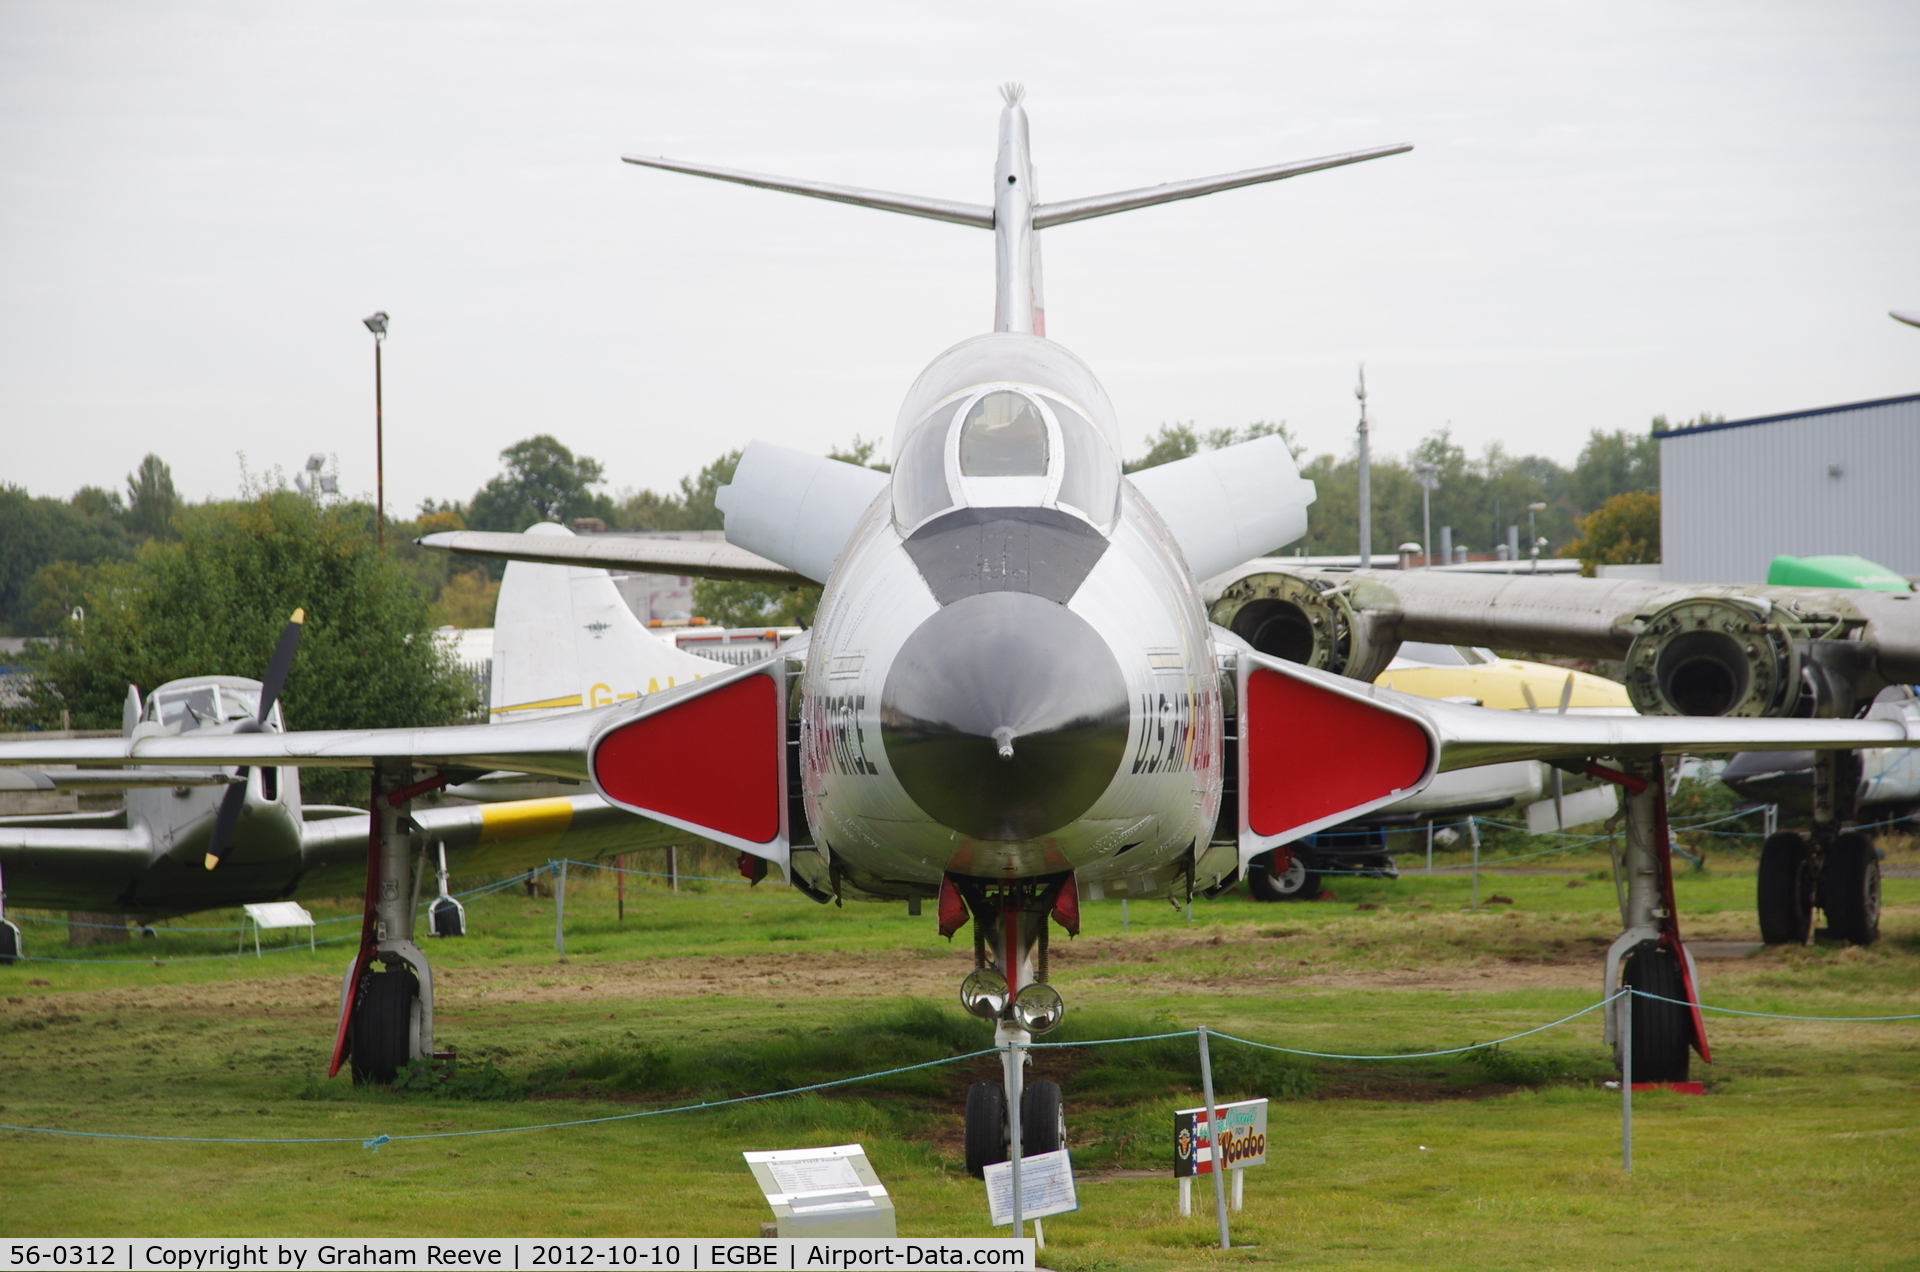 56-0312, 1956 McDonnell F-101B Voodoo C/N 408, Preserved at the Midland Air Museum.